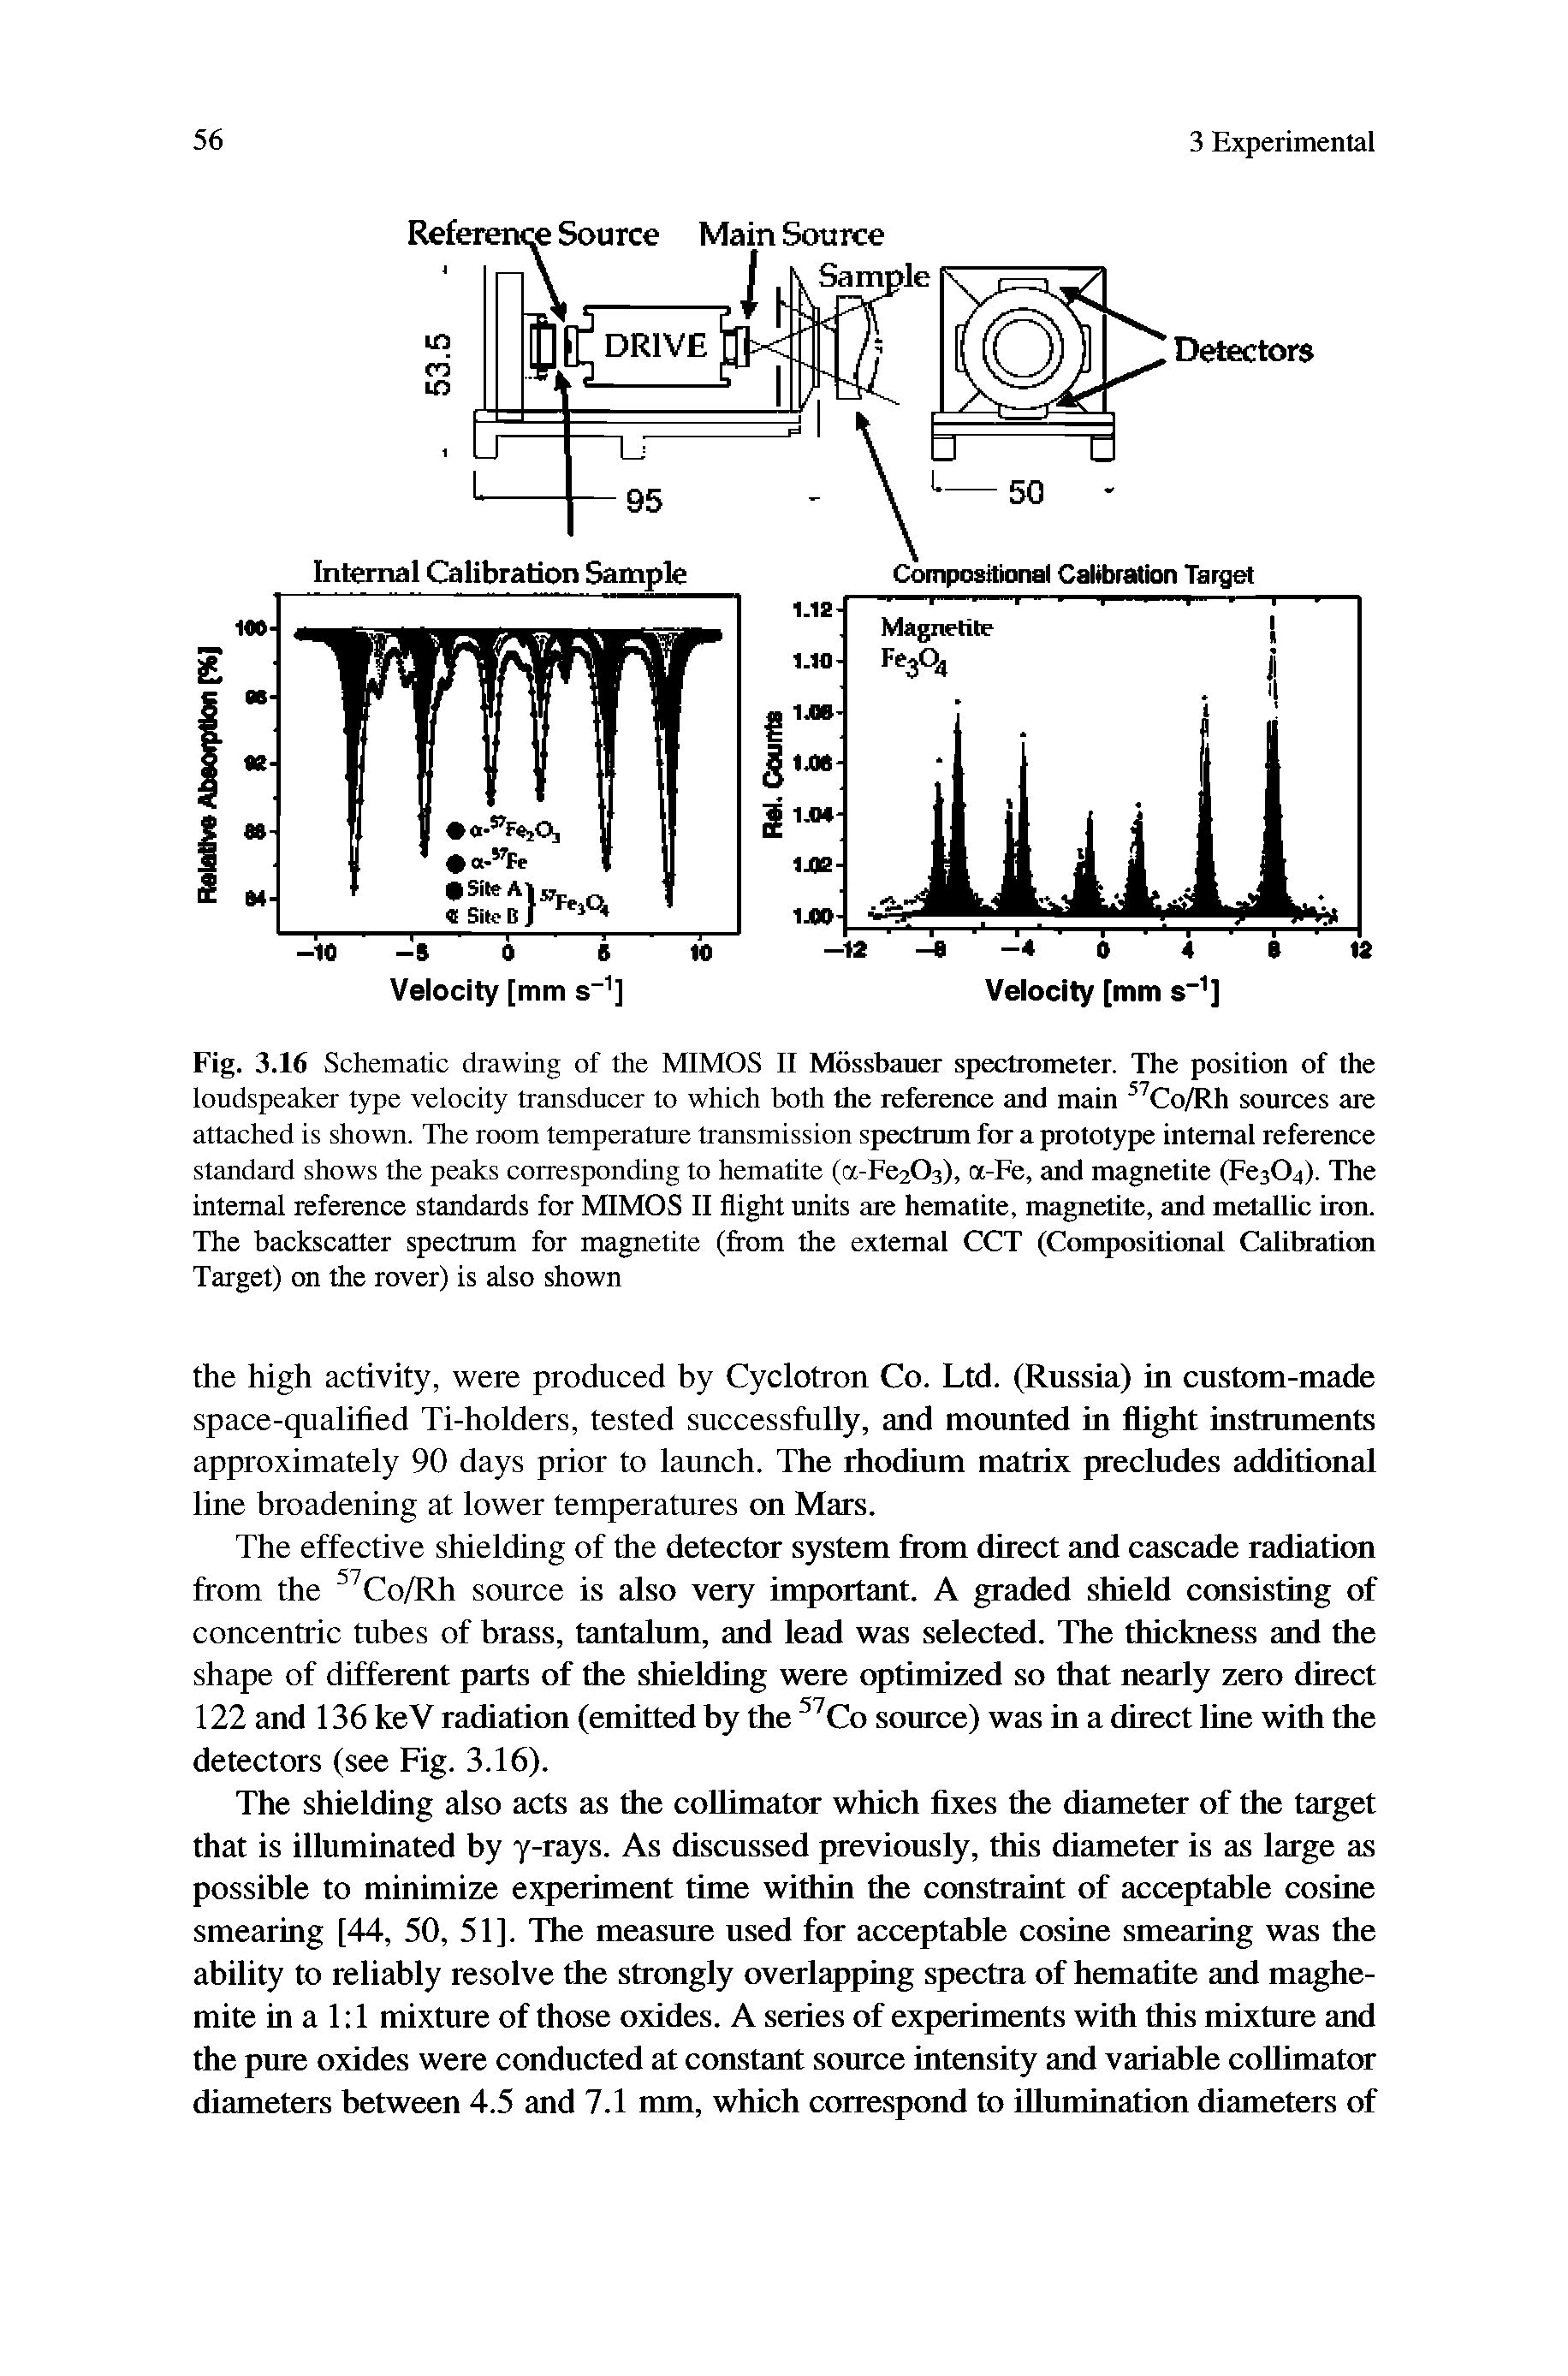 Fig. 3.16 Schematic drawing of the MIMOS II Mossbauer spectrometer. The position of the loudspeaker type velocity transducer to which both the reference and main Co/Rh sources are attached is shown. The room temperature transmission spectrum for a prototype internal reference standard shows the peaks corresponding to hematite (a-Fe203), a-Fe, and magnetite (Fe304). The internal reference standards for MIMOS II flight units are hematite, magnetite, and metallic iron. The backscatter spectrum for magnetite (from the external CCT (Compositional Calibration Target) on the rover) is also shown...